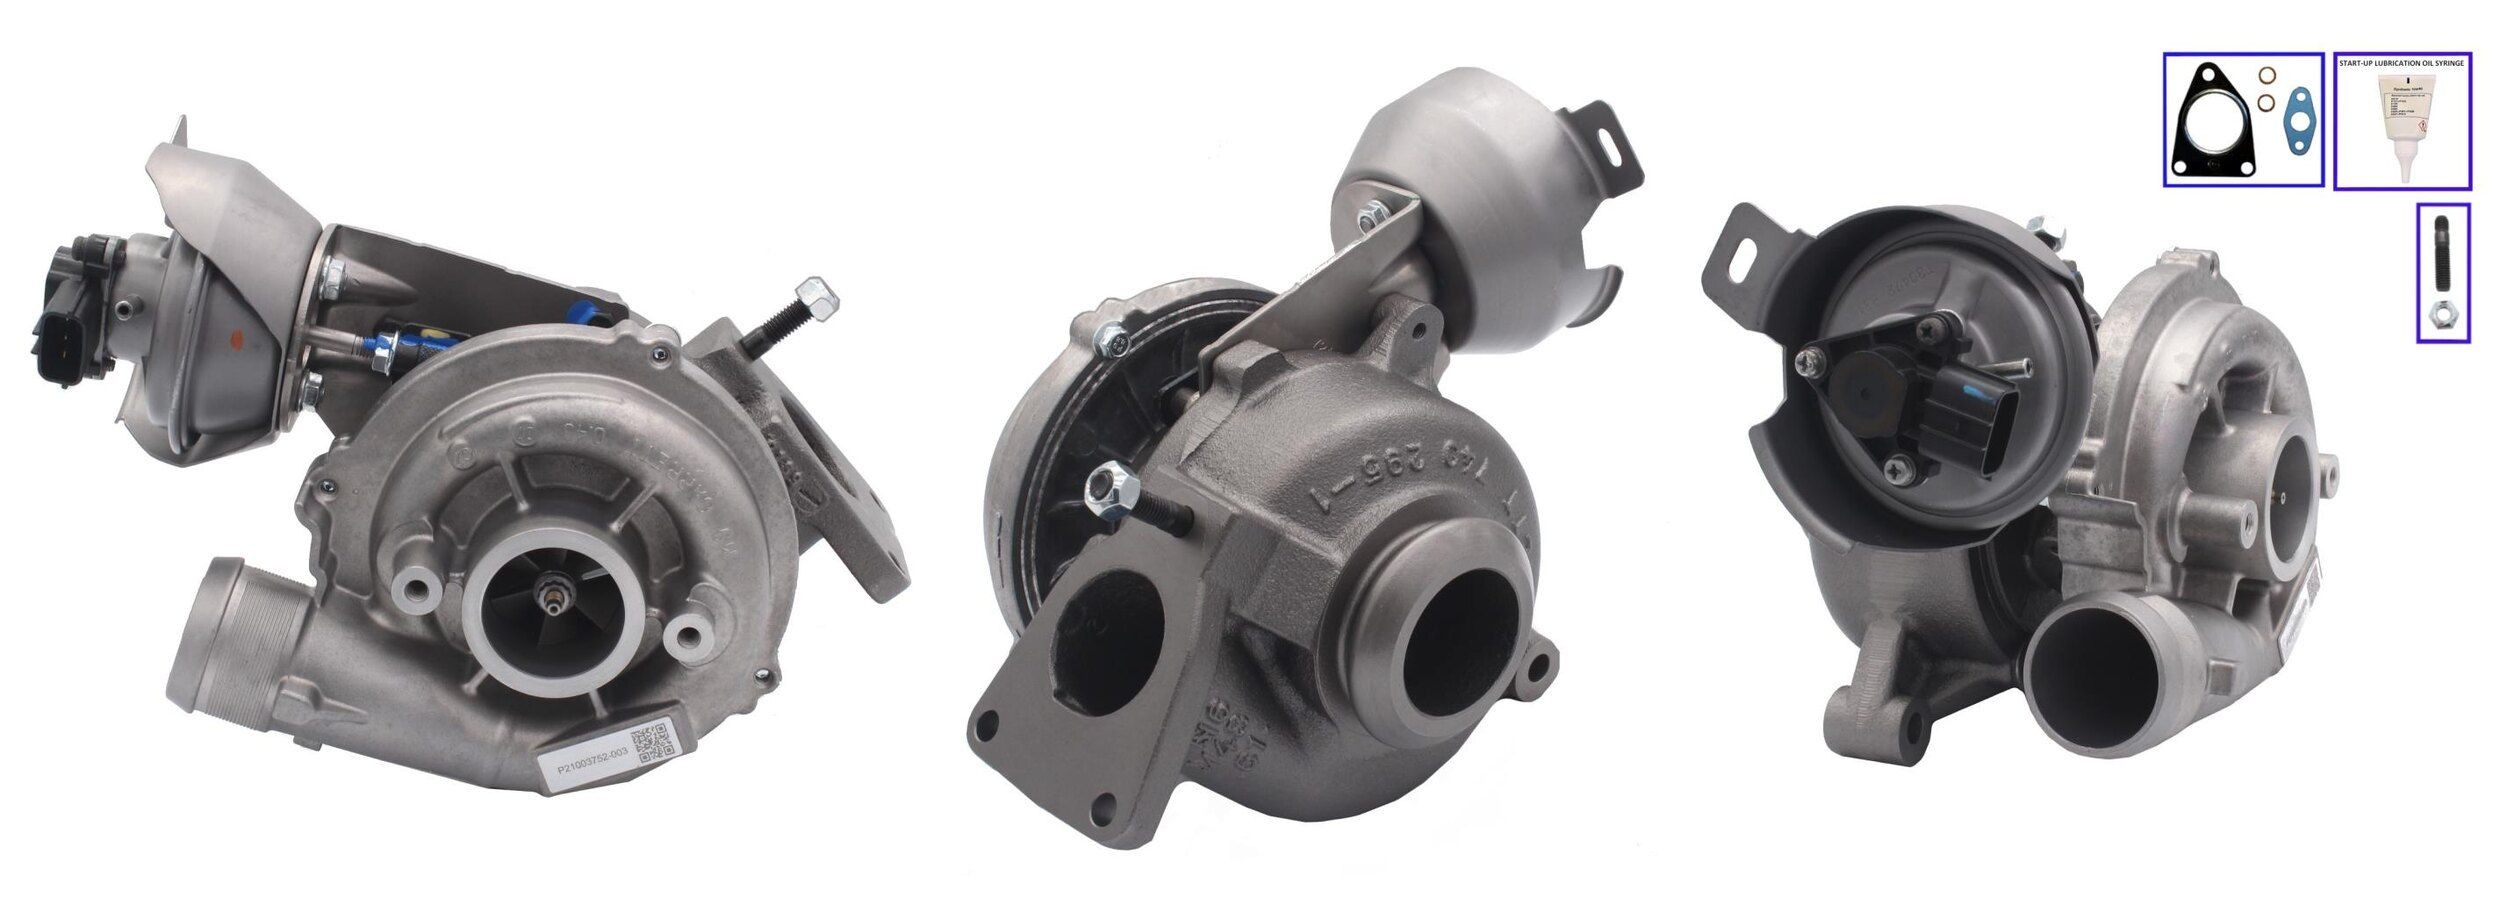 ELSTOCK Exhaust Turbocharger, with linear position sensor (LPS), with gaskets/seals Turbo 91-1895 buy